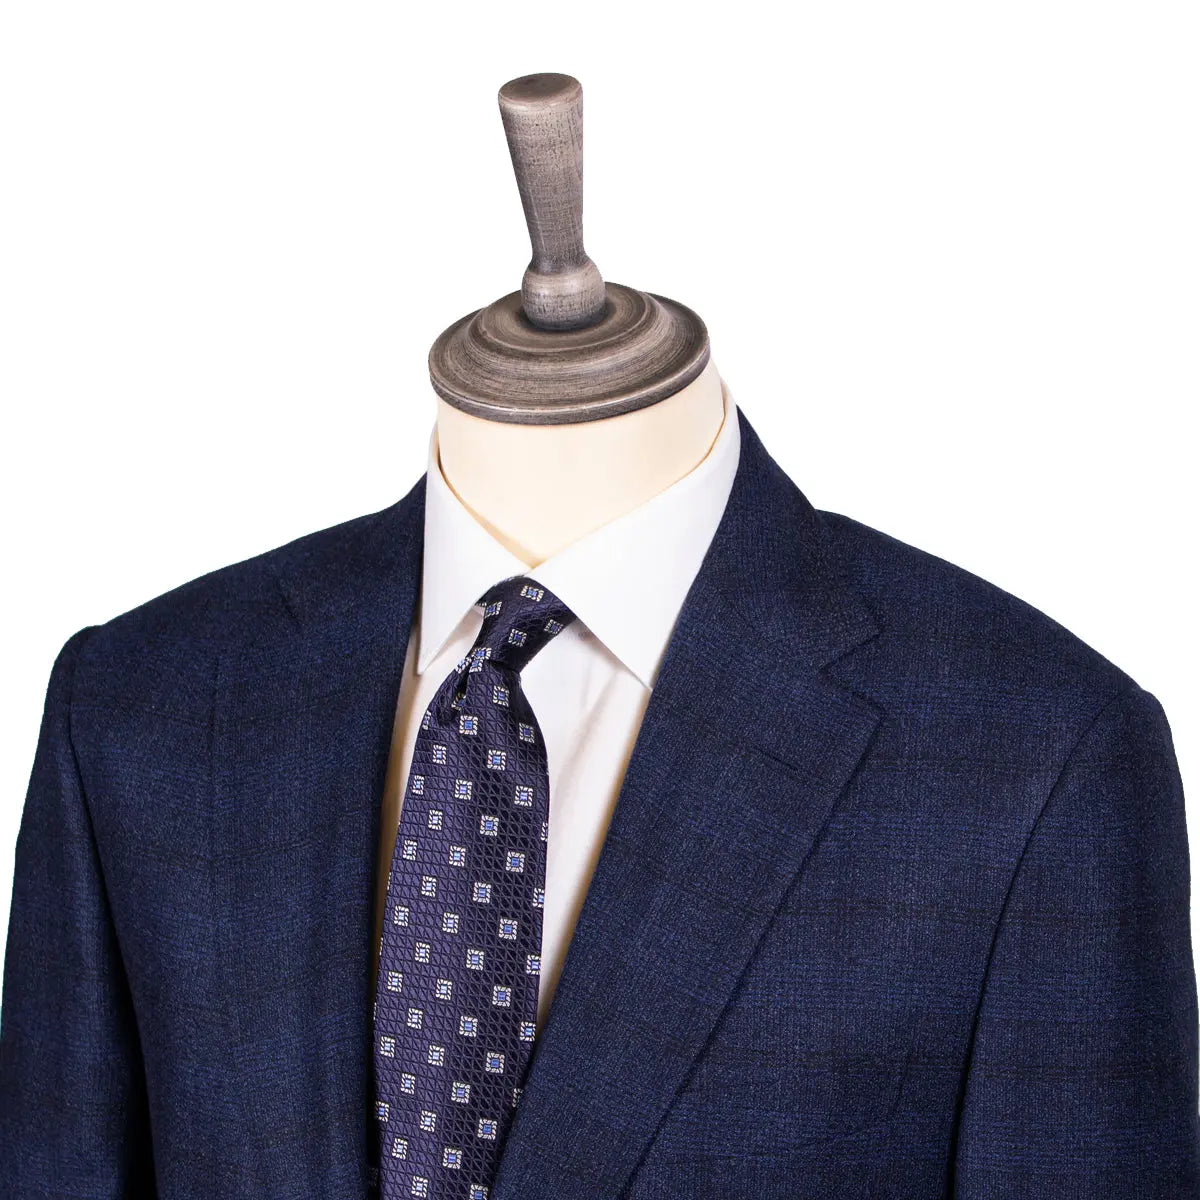 Blue Prince of Wales Check Wool Suit  Robert Old   